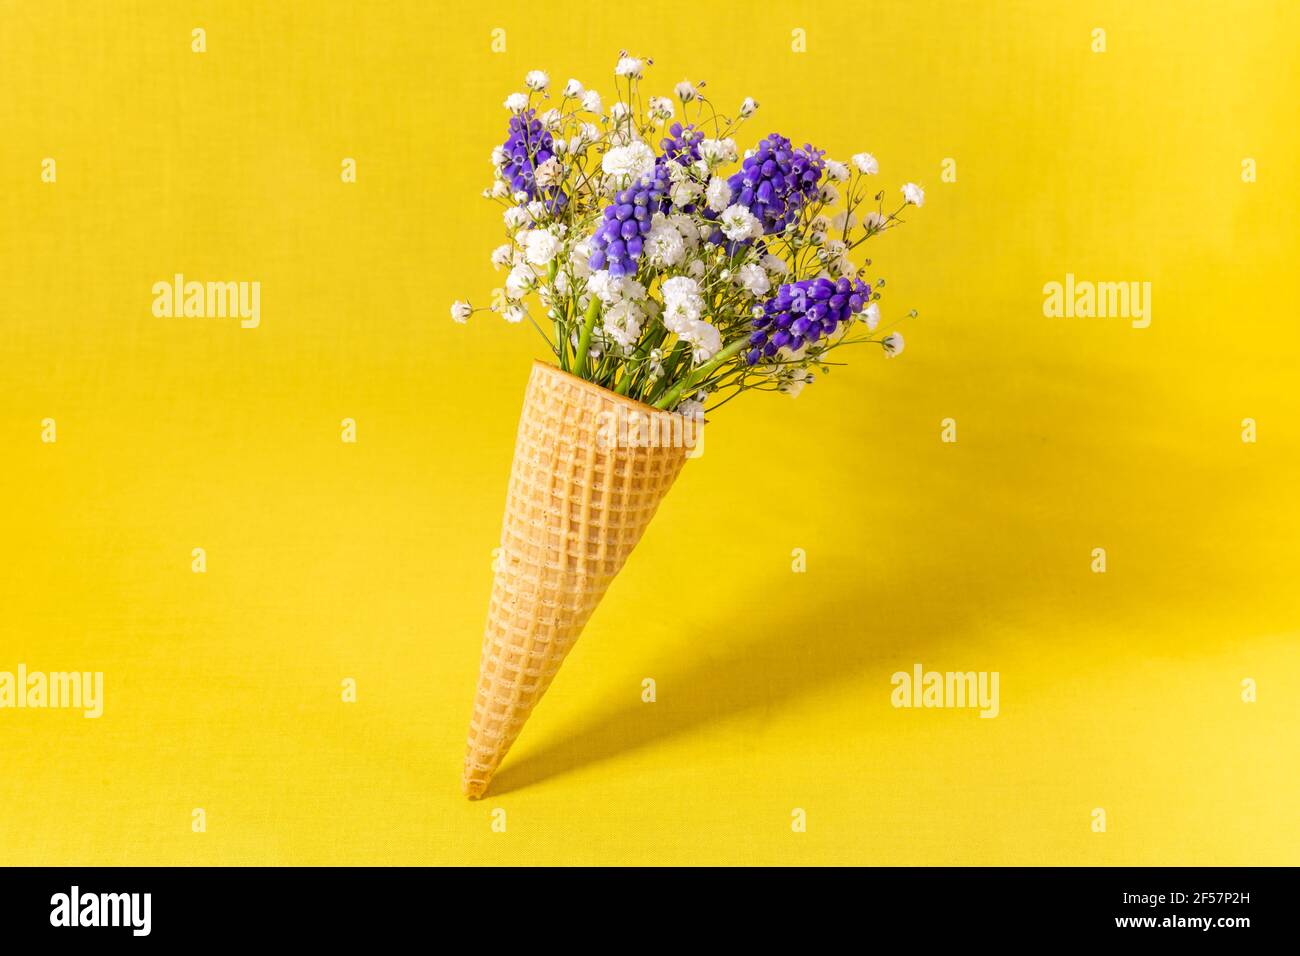 Ice cream cone with flowers on yellow background. Side view, copy space, spring flowers concept Stock Photo